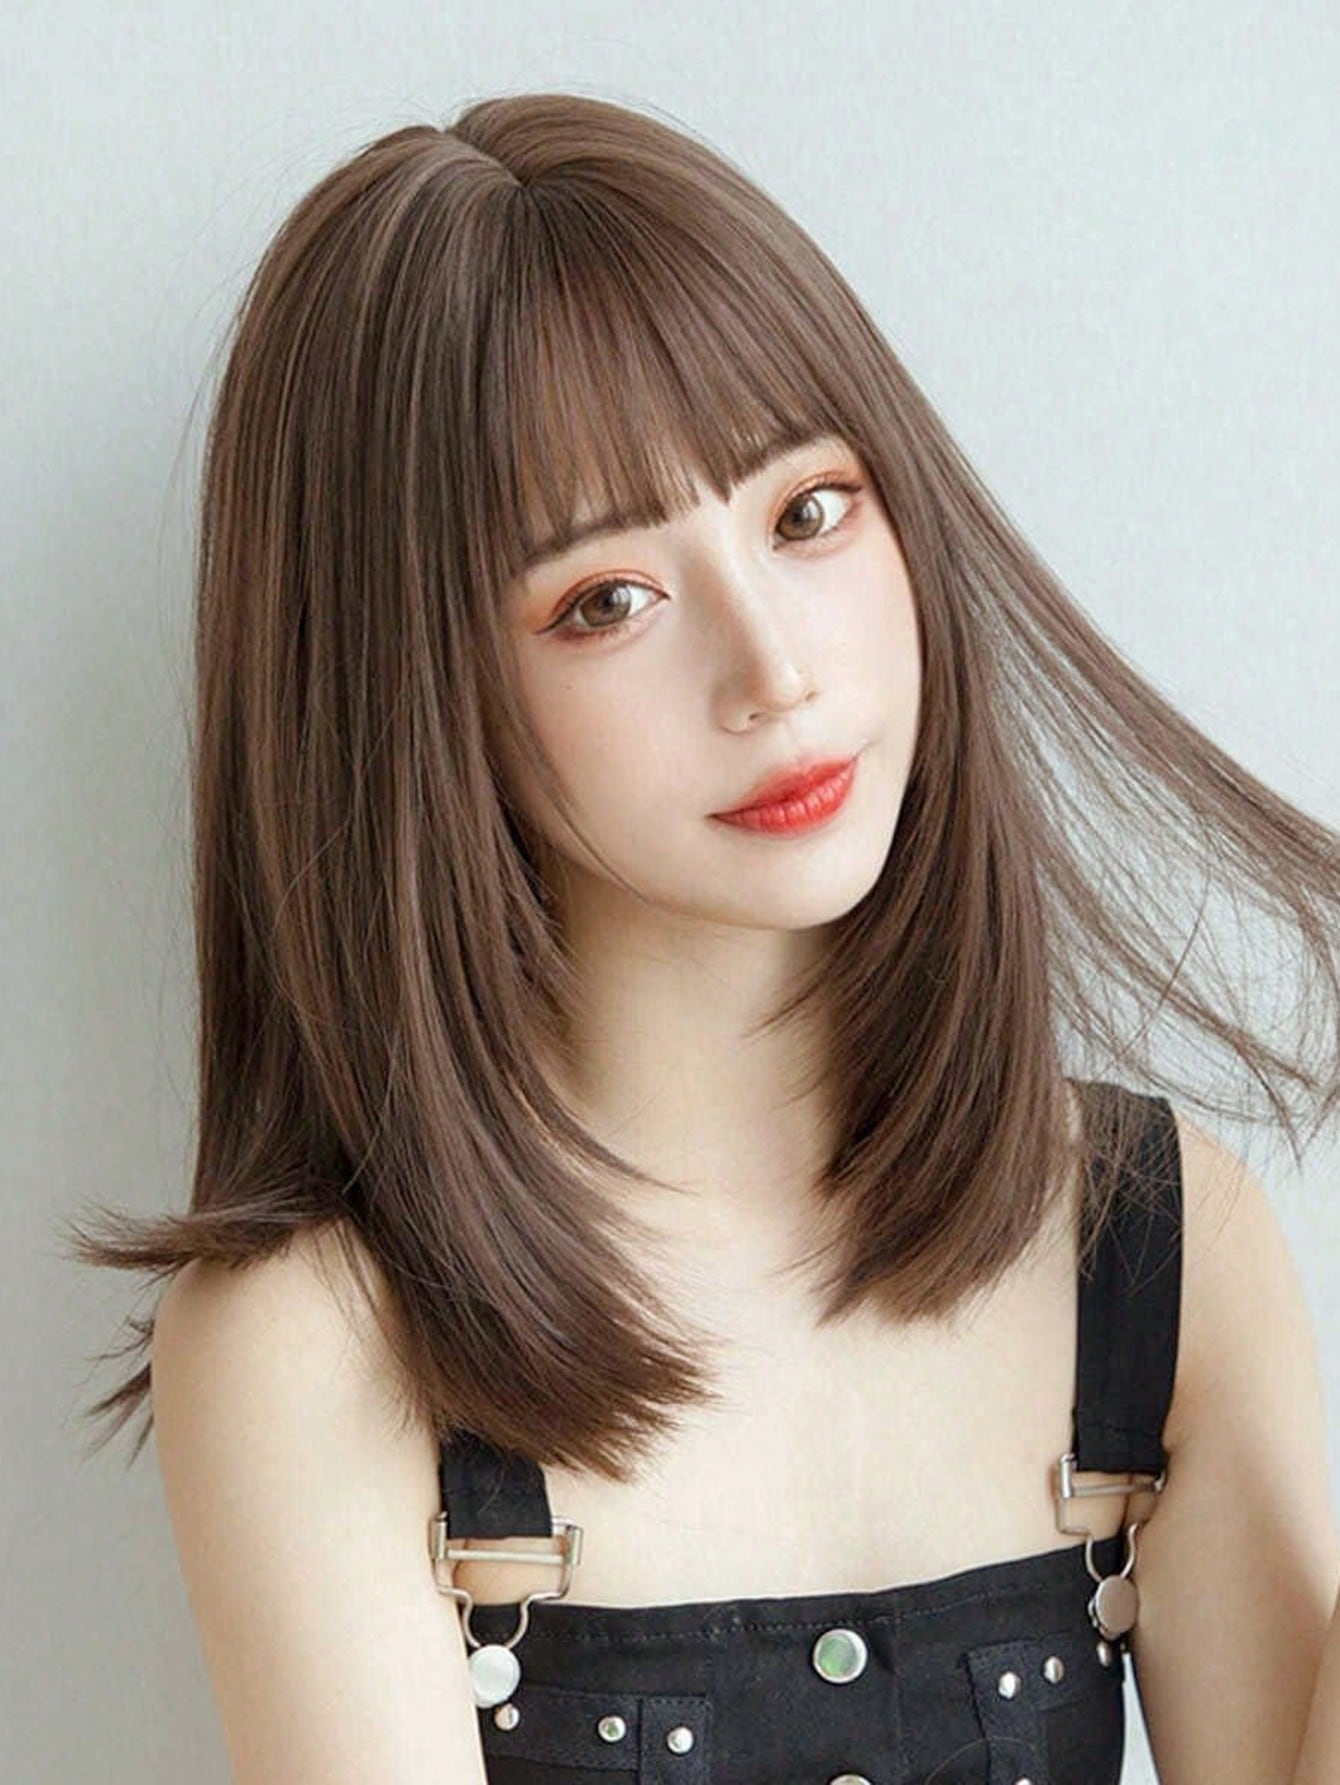 Synthetic heat resistant wigs medium length straight hair wigs with bangs brown 16 Inch affordable natural daily hair daily party use beginner friendly